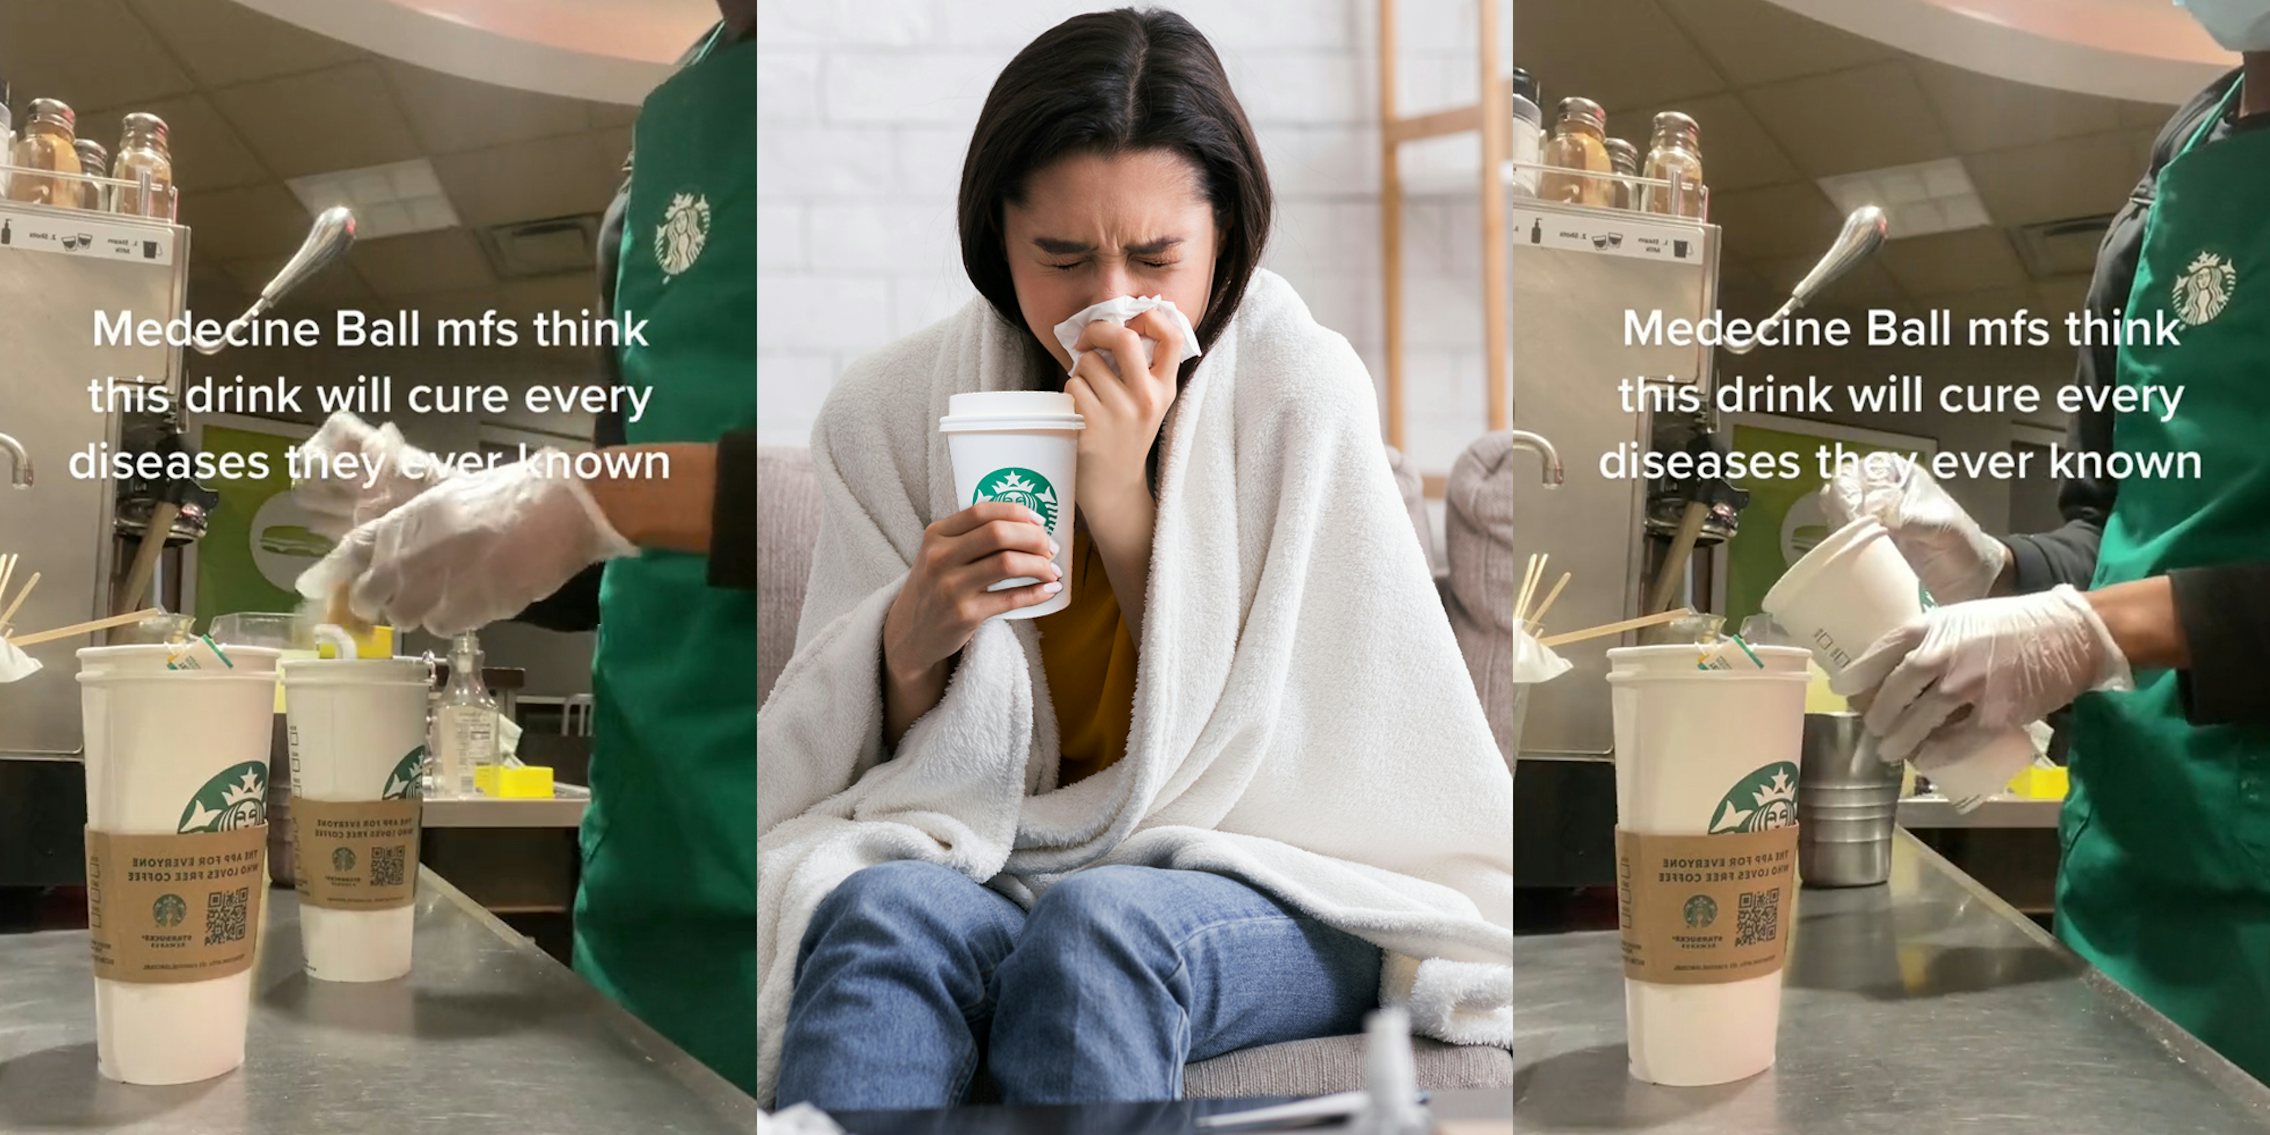 Starbucks barista making 'medicine ball' drink caption 'Medicine Ball mfs think this drink will cure every diseases they ever known' (l) sick woman blowing nose holding Starbucks drink (c) Starbucks barista making 'medicine ball' drink caption 'Medicine Ball mfs think this drink will cure every diseases they ever known' (r)